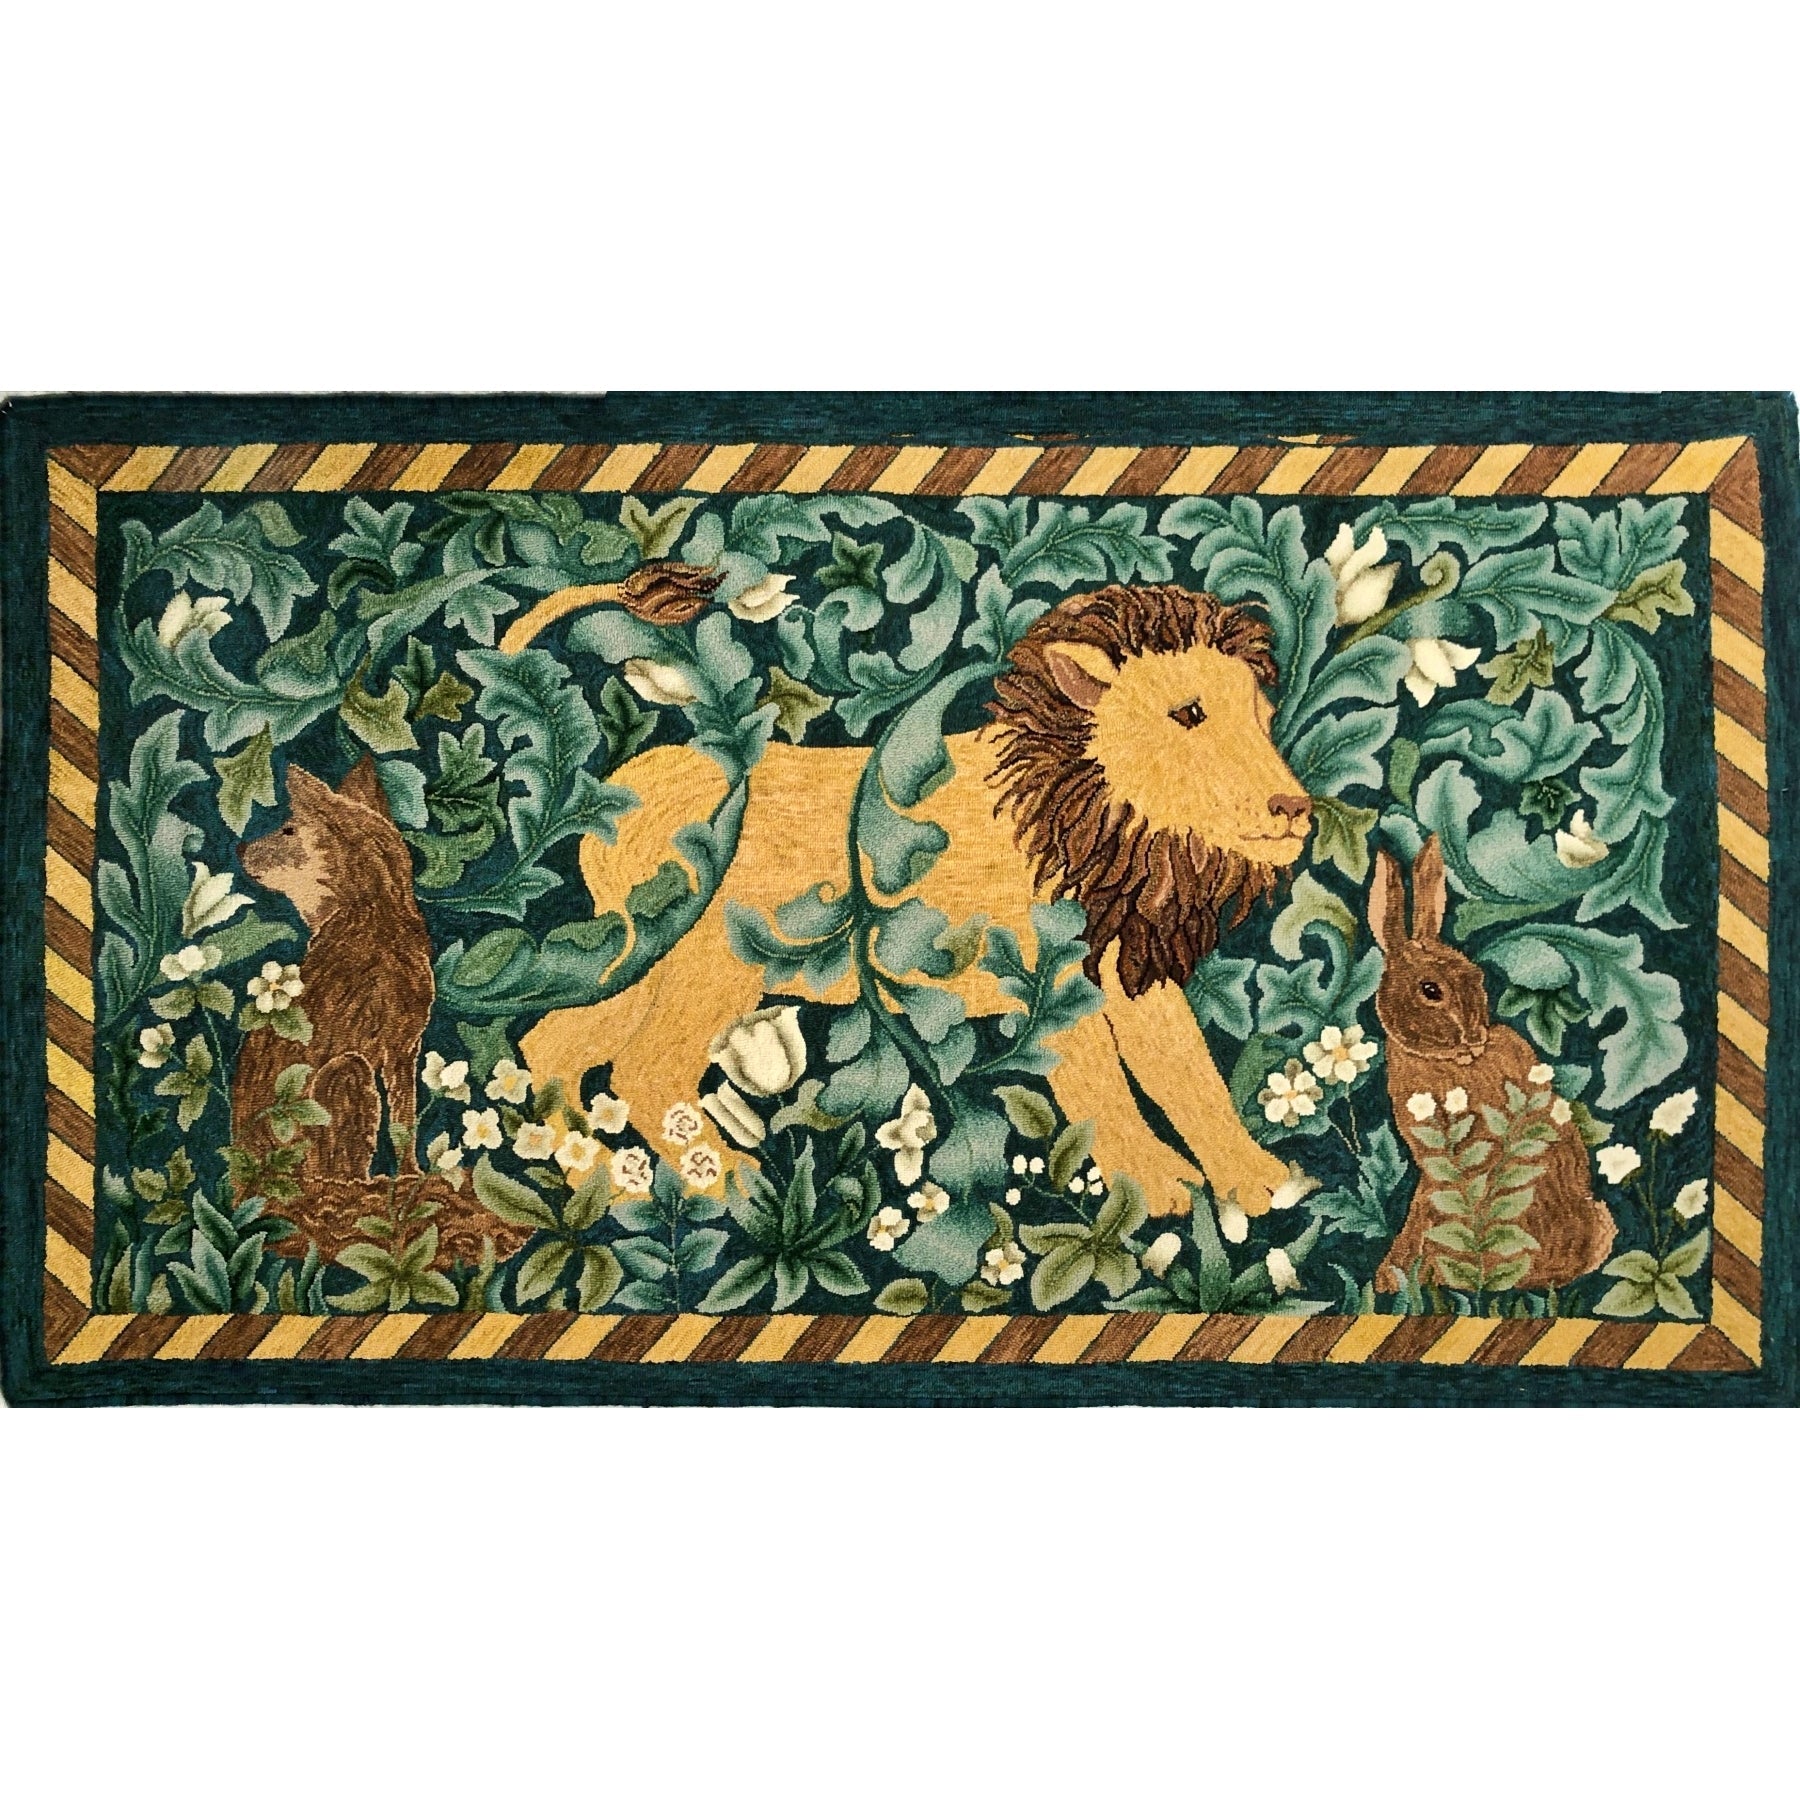 Morris Forest, rug hooked by Patricia Miller